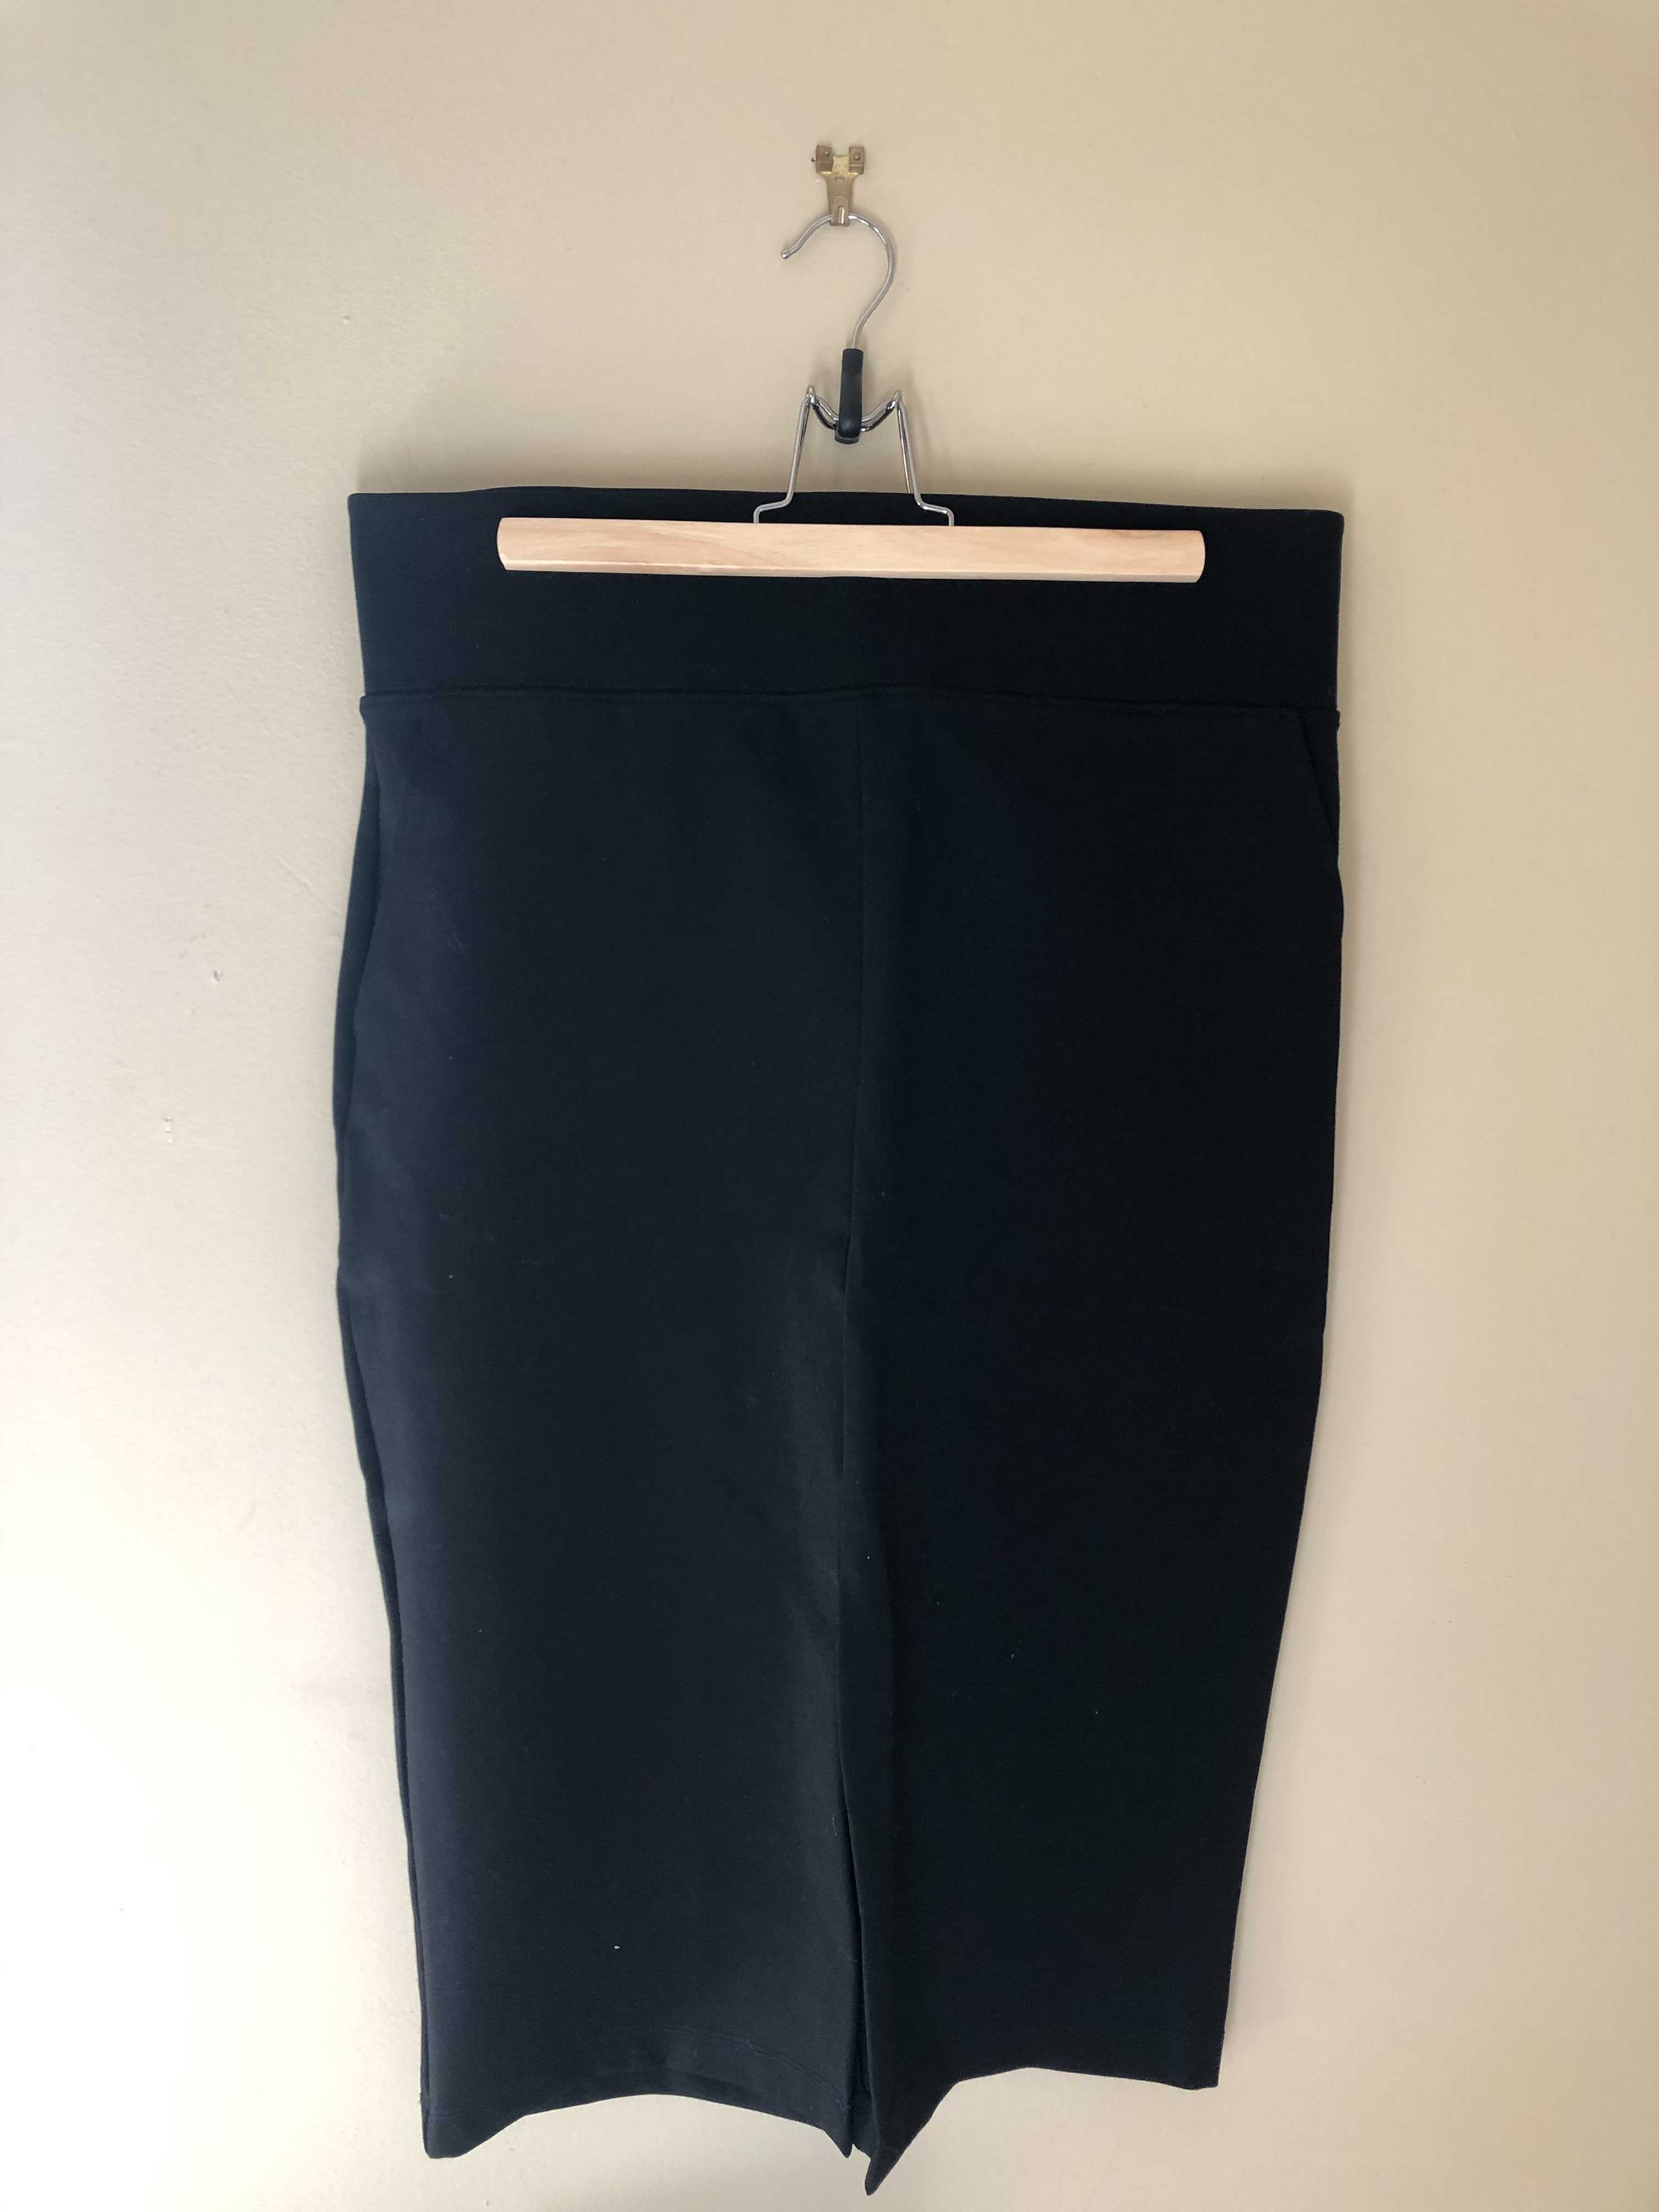 Pre-Loved: The Pencil Skirt - Brass Exchange